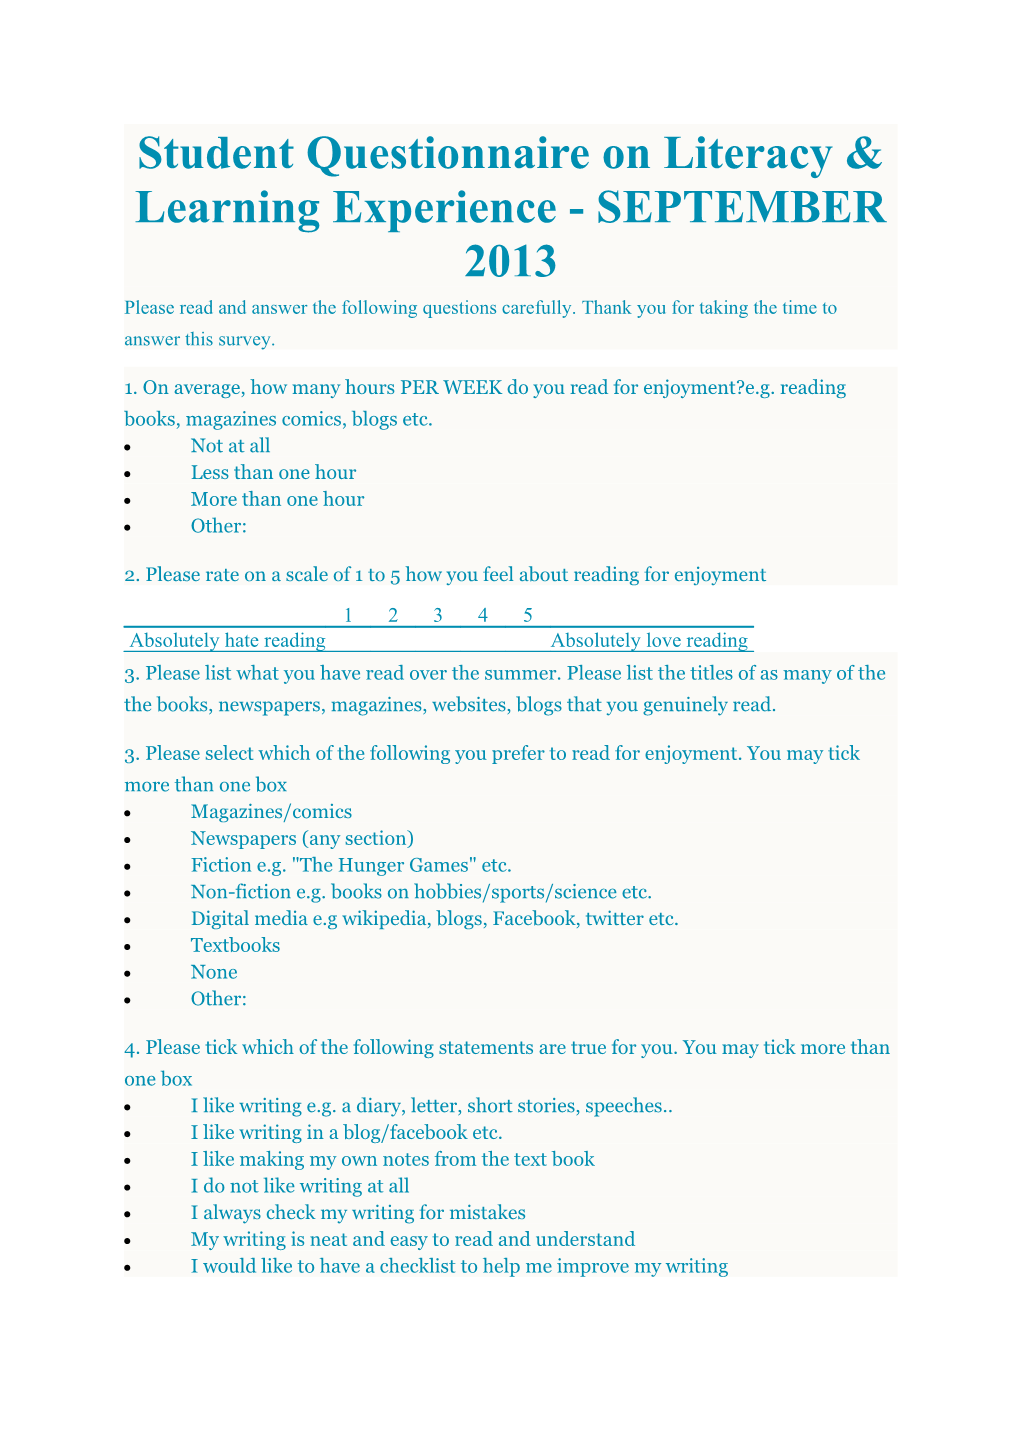 Student Questionnaire on Literacy & Learning Experience - SEPTEMBER 2013